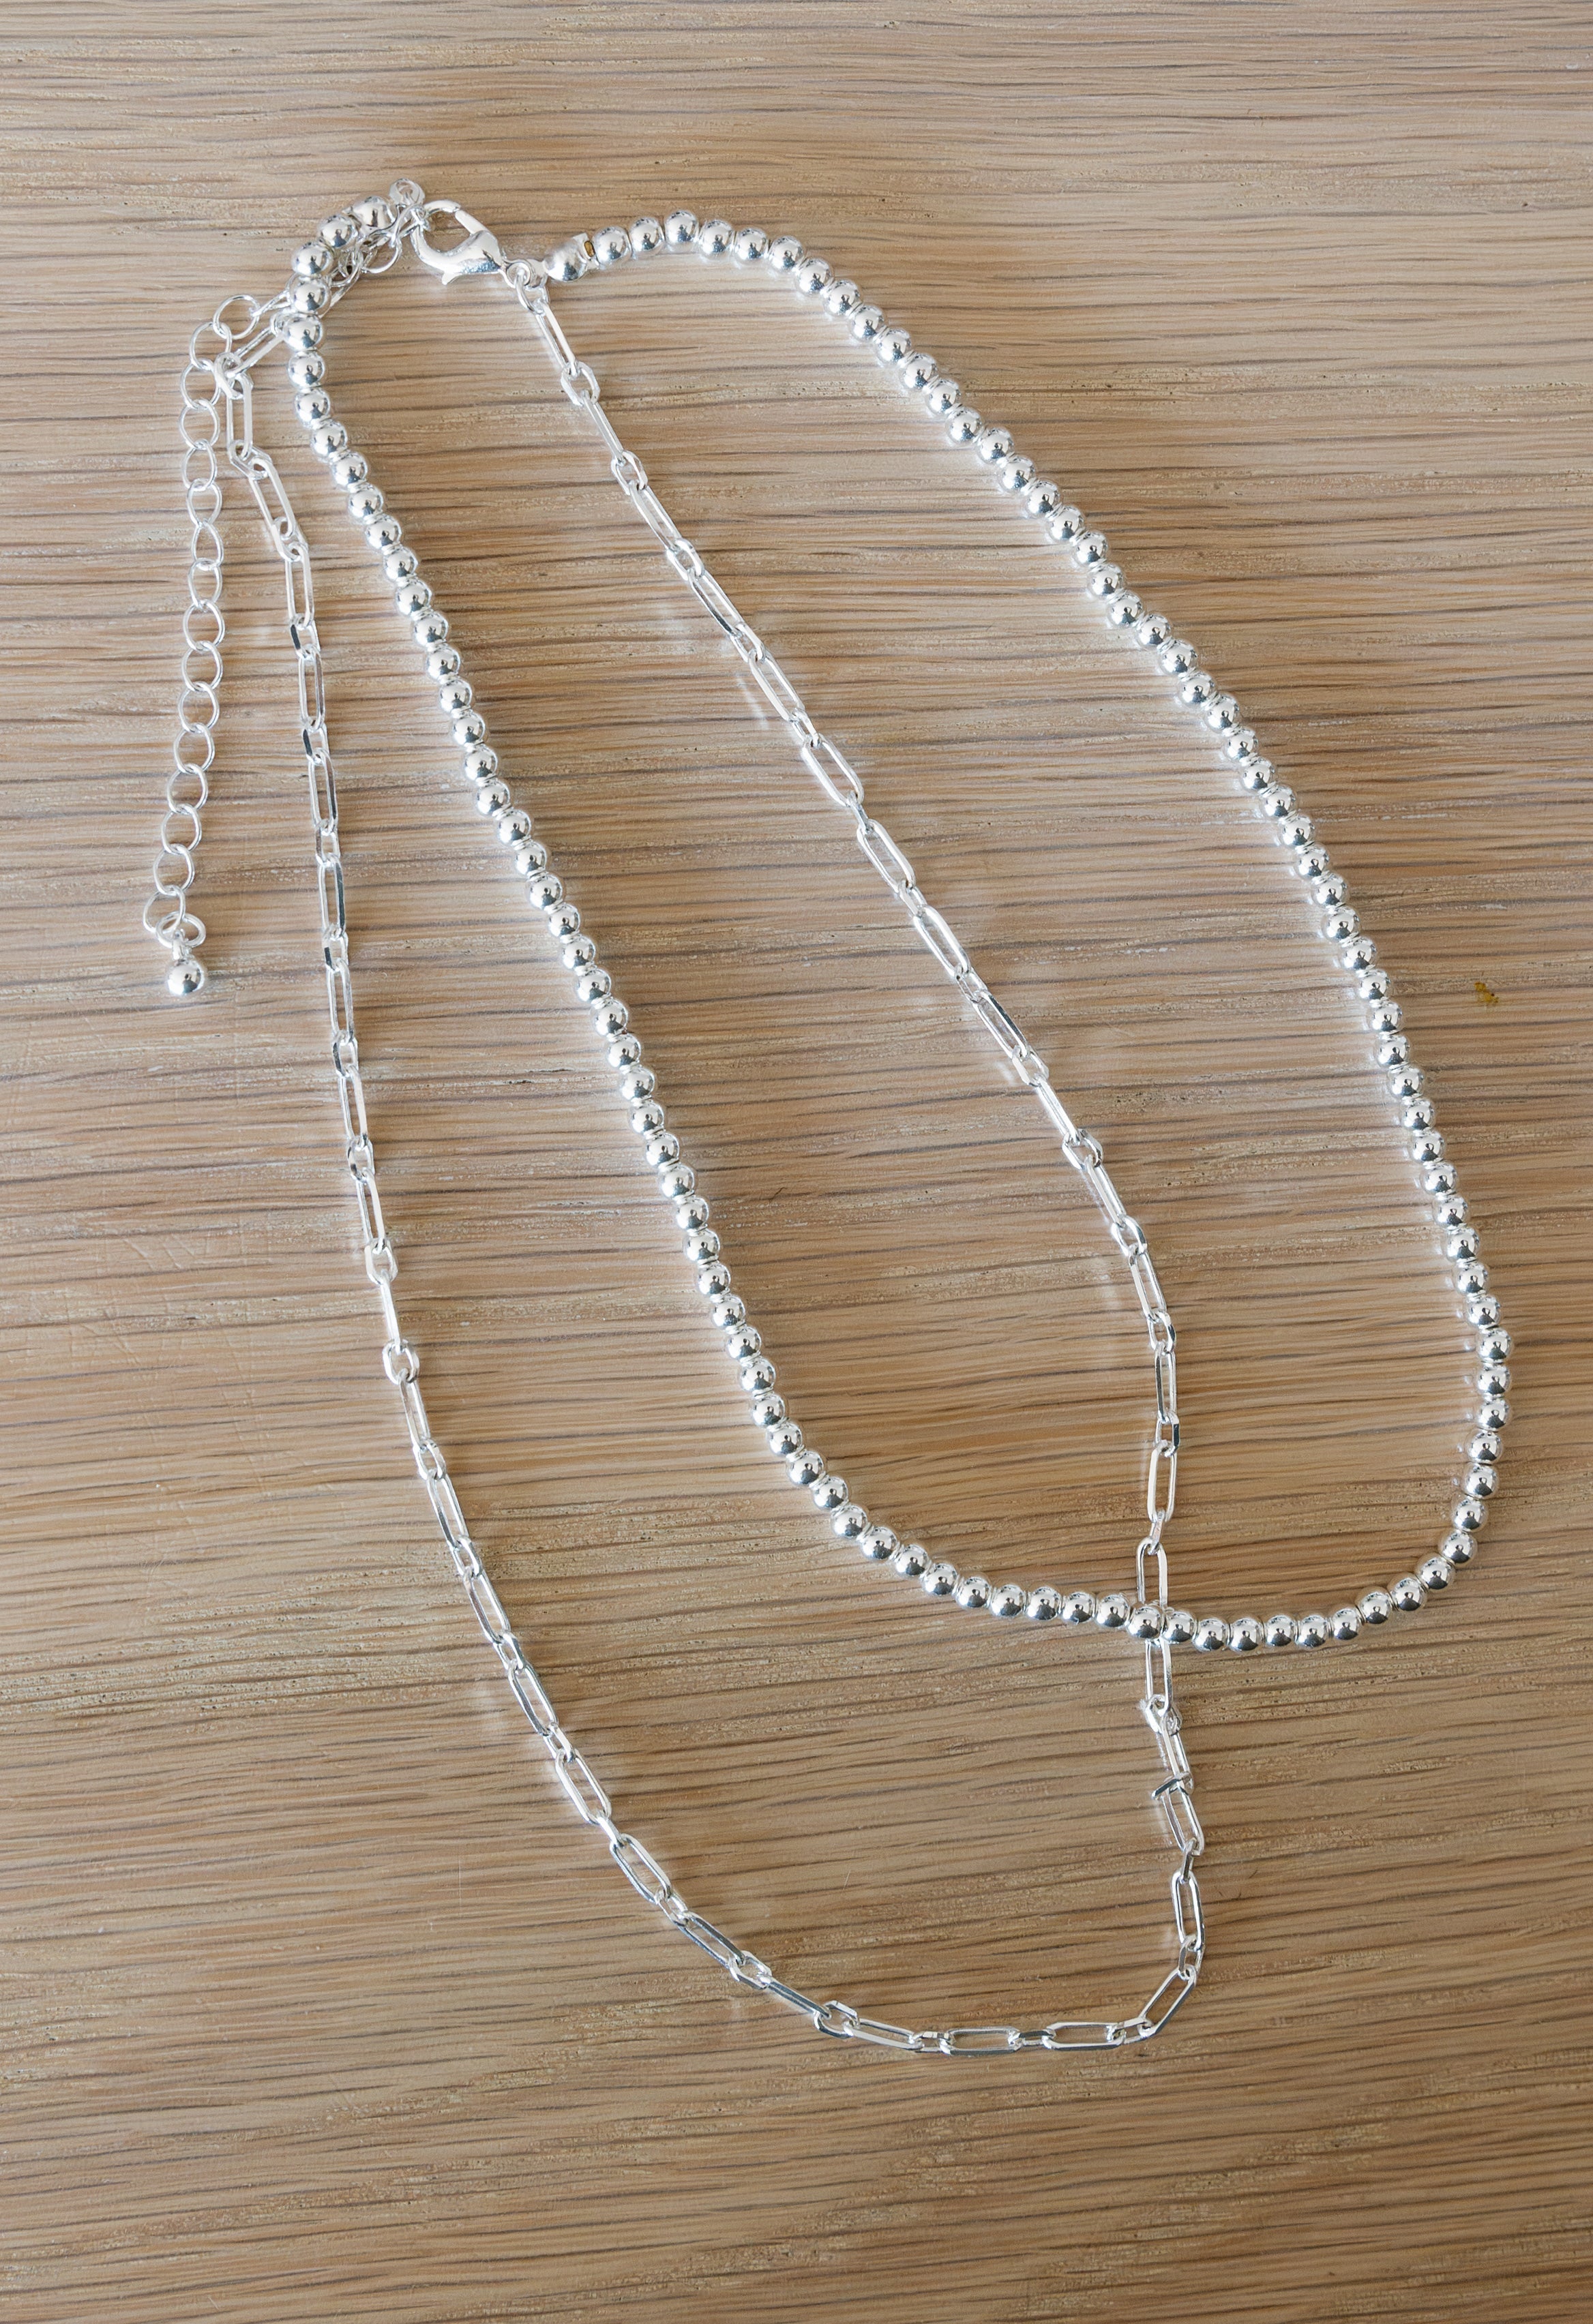 Genoa Necklace - SILVER - willows clothing NECKLACE